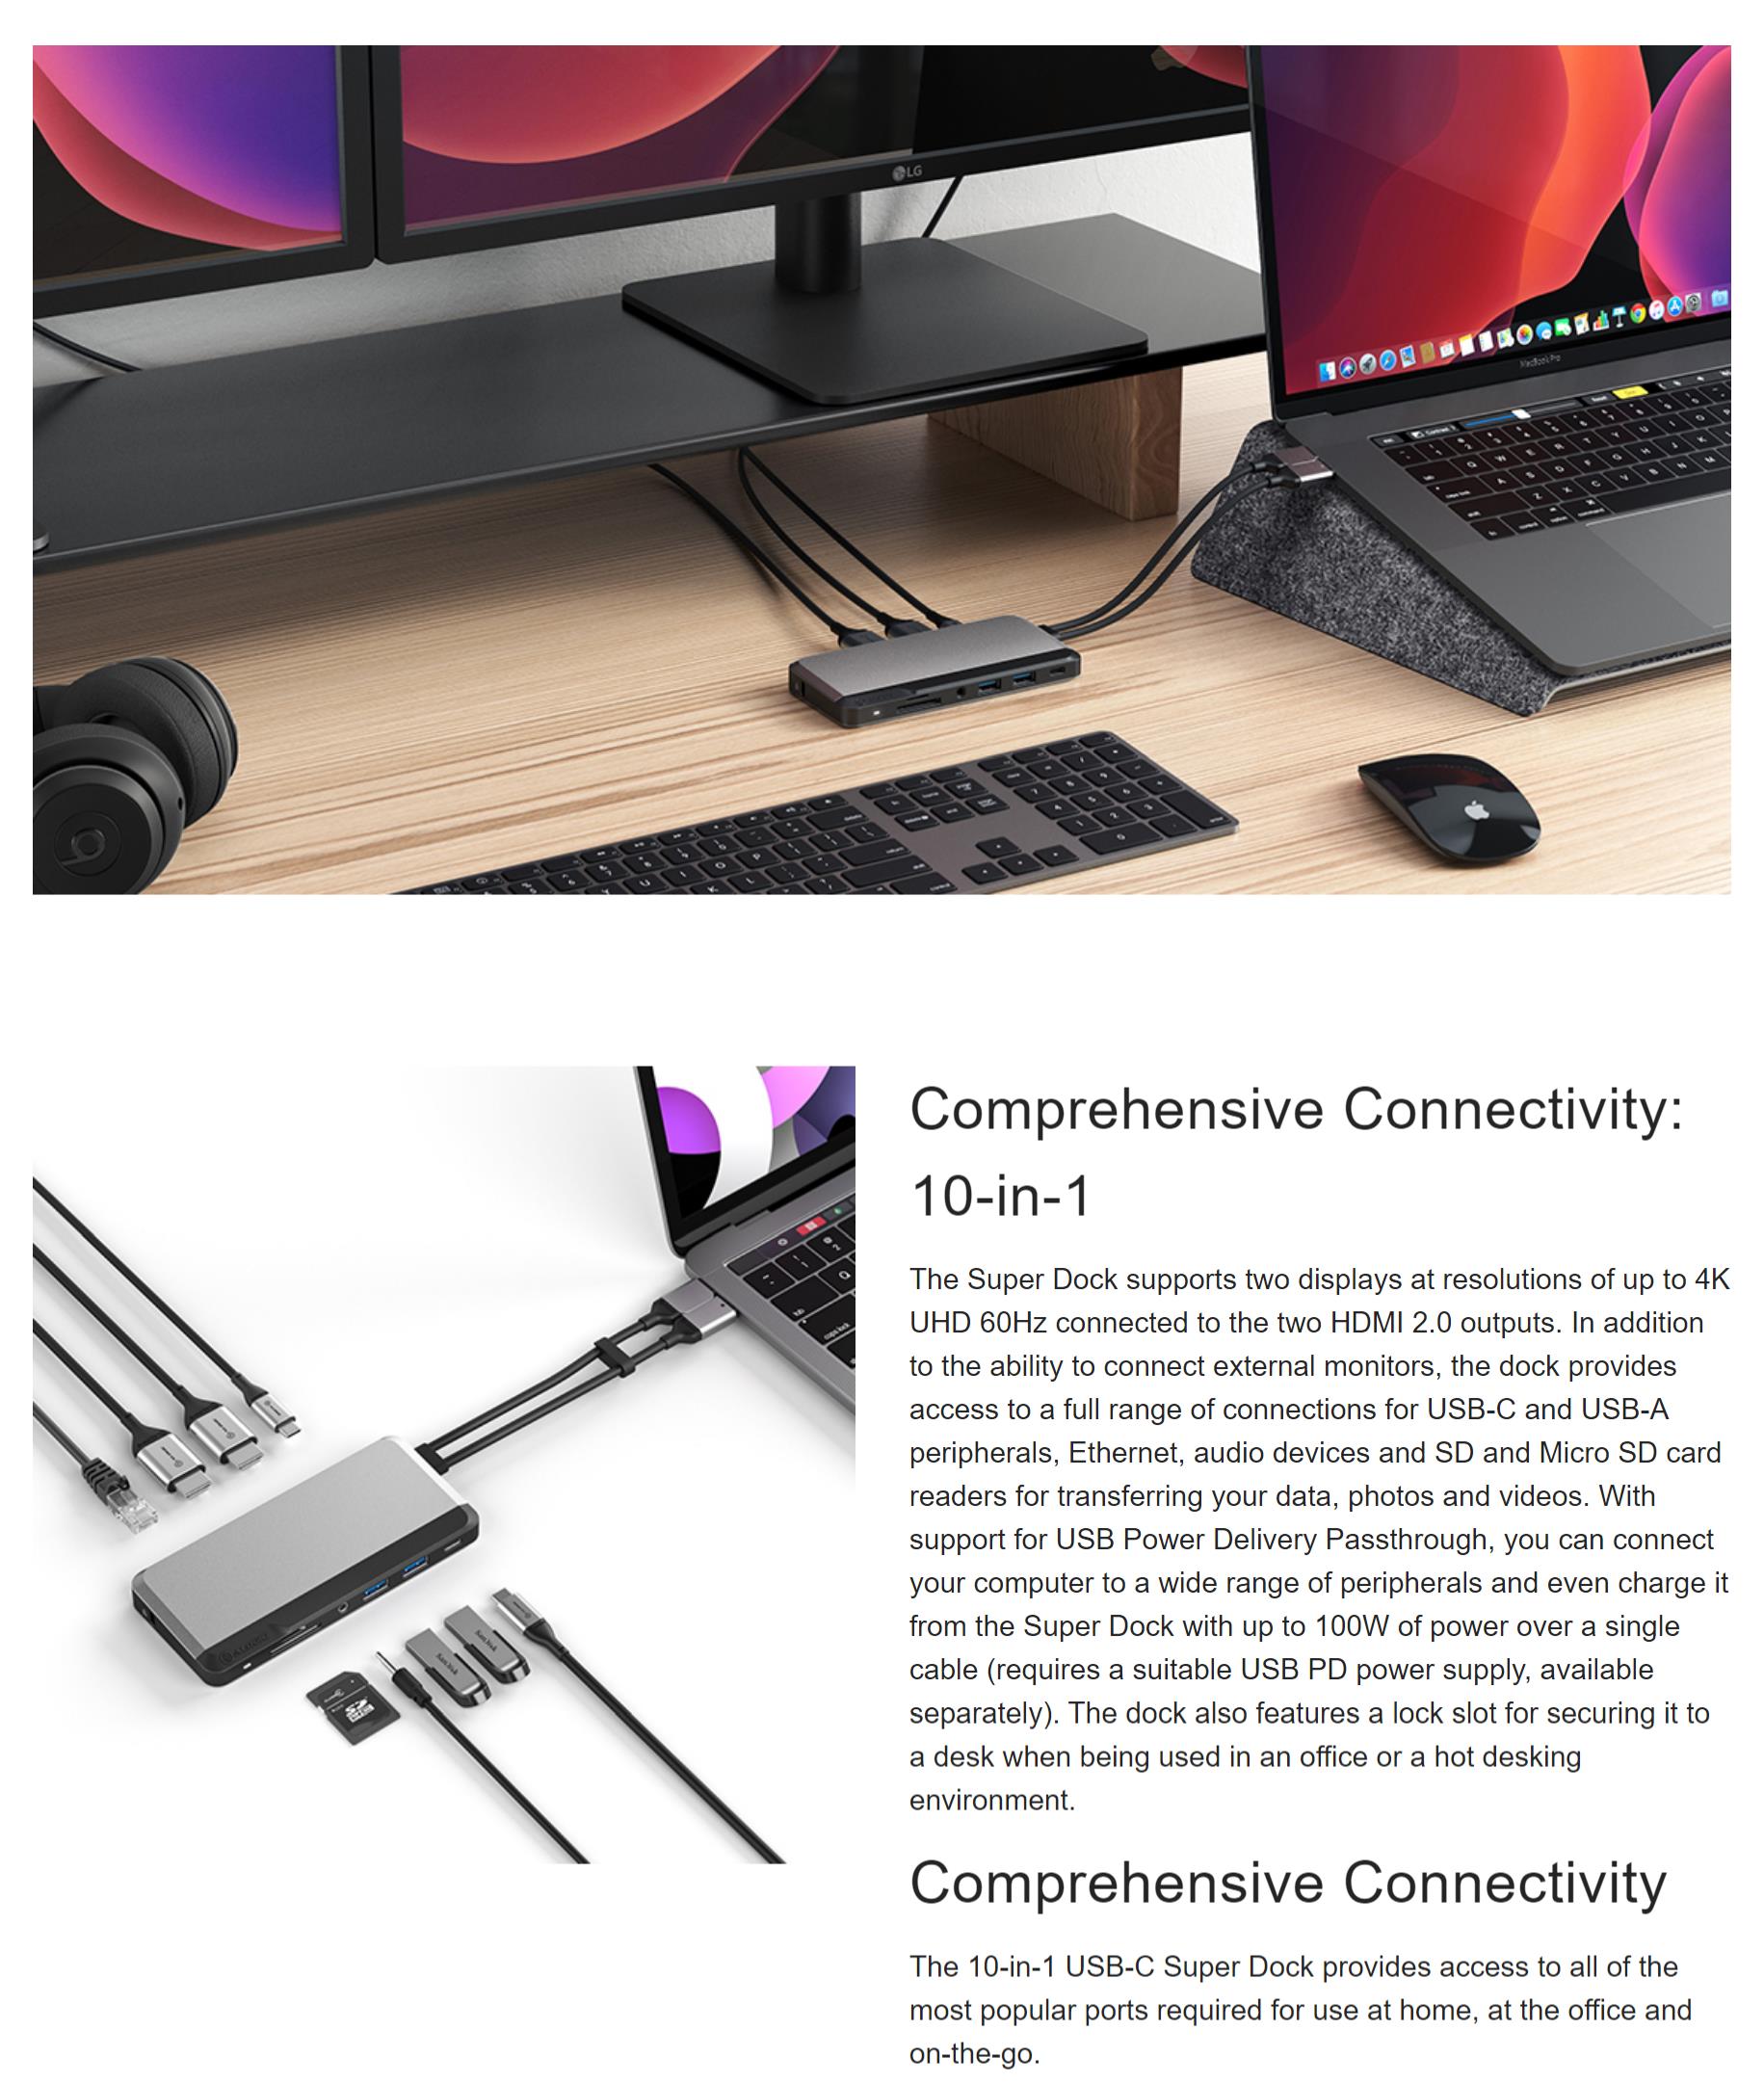 A large marketing image providing additional information about the product ALOGIC USB-C Super Dock 10-in-1 with Dual Display 4K - Space Grey - Additional alt info not provided